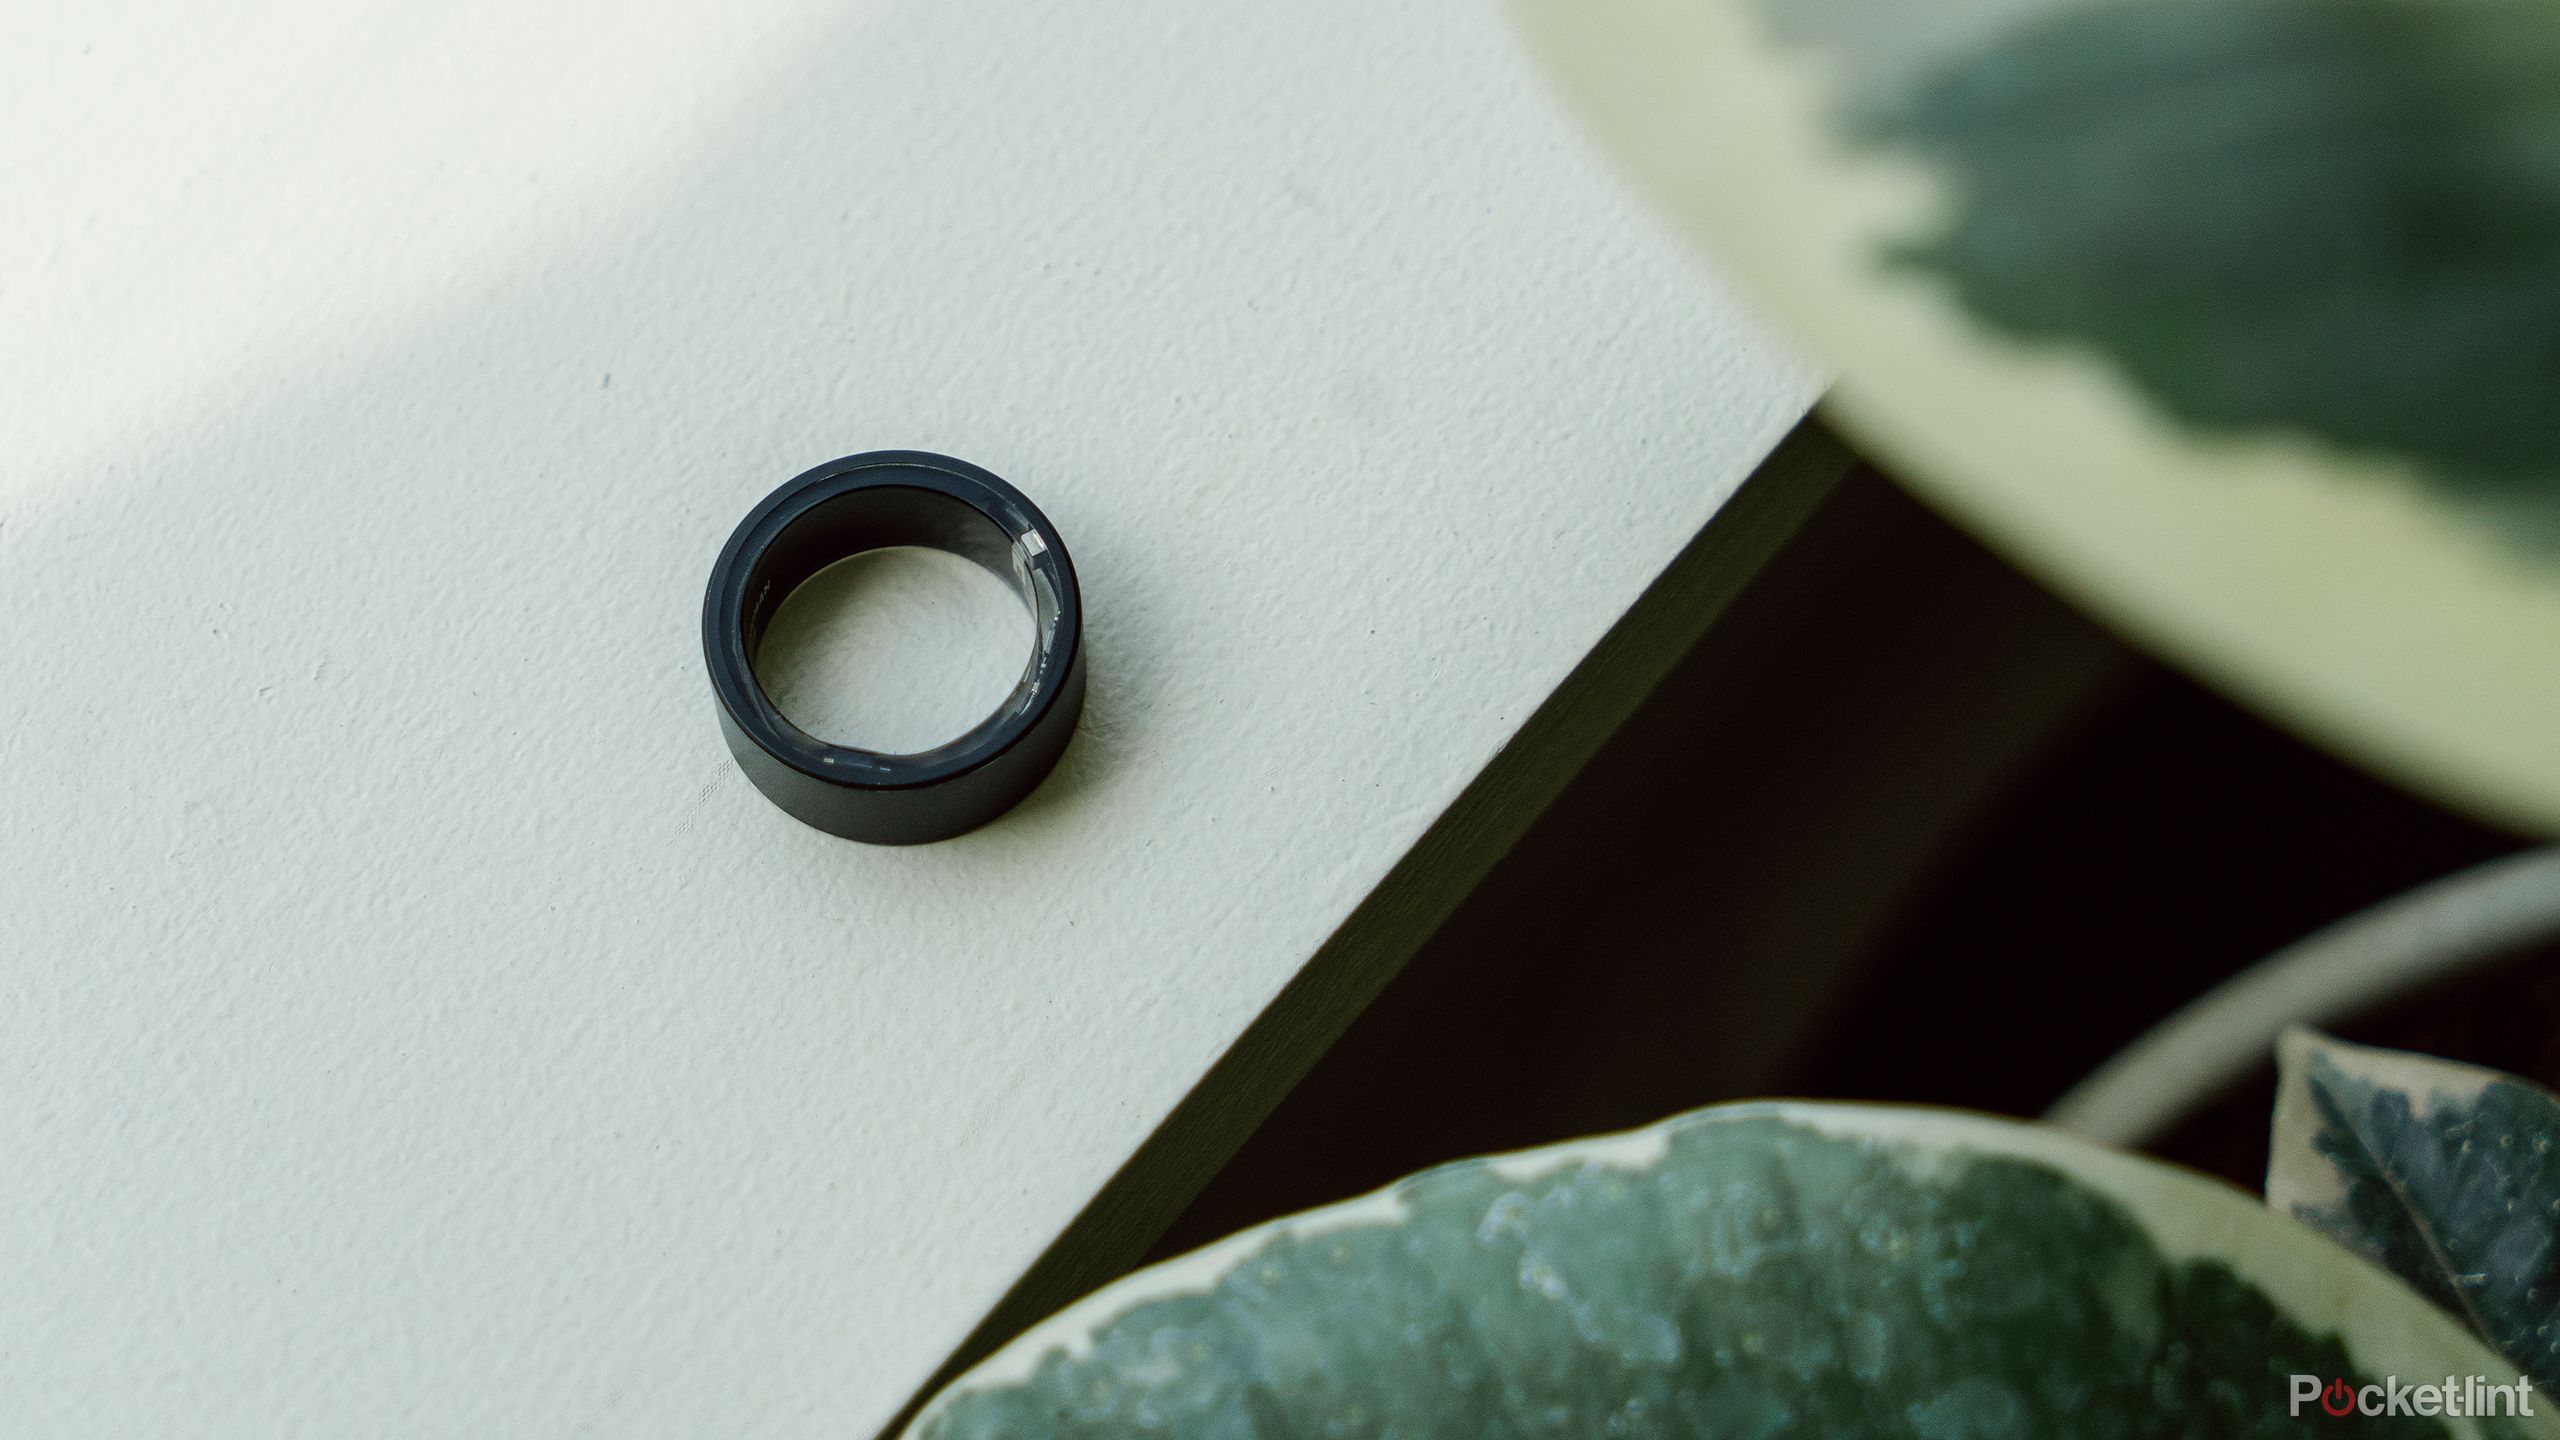 The Ultrahuman Ring Air sits on a windowsill next to a plant.